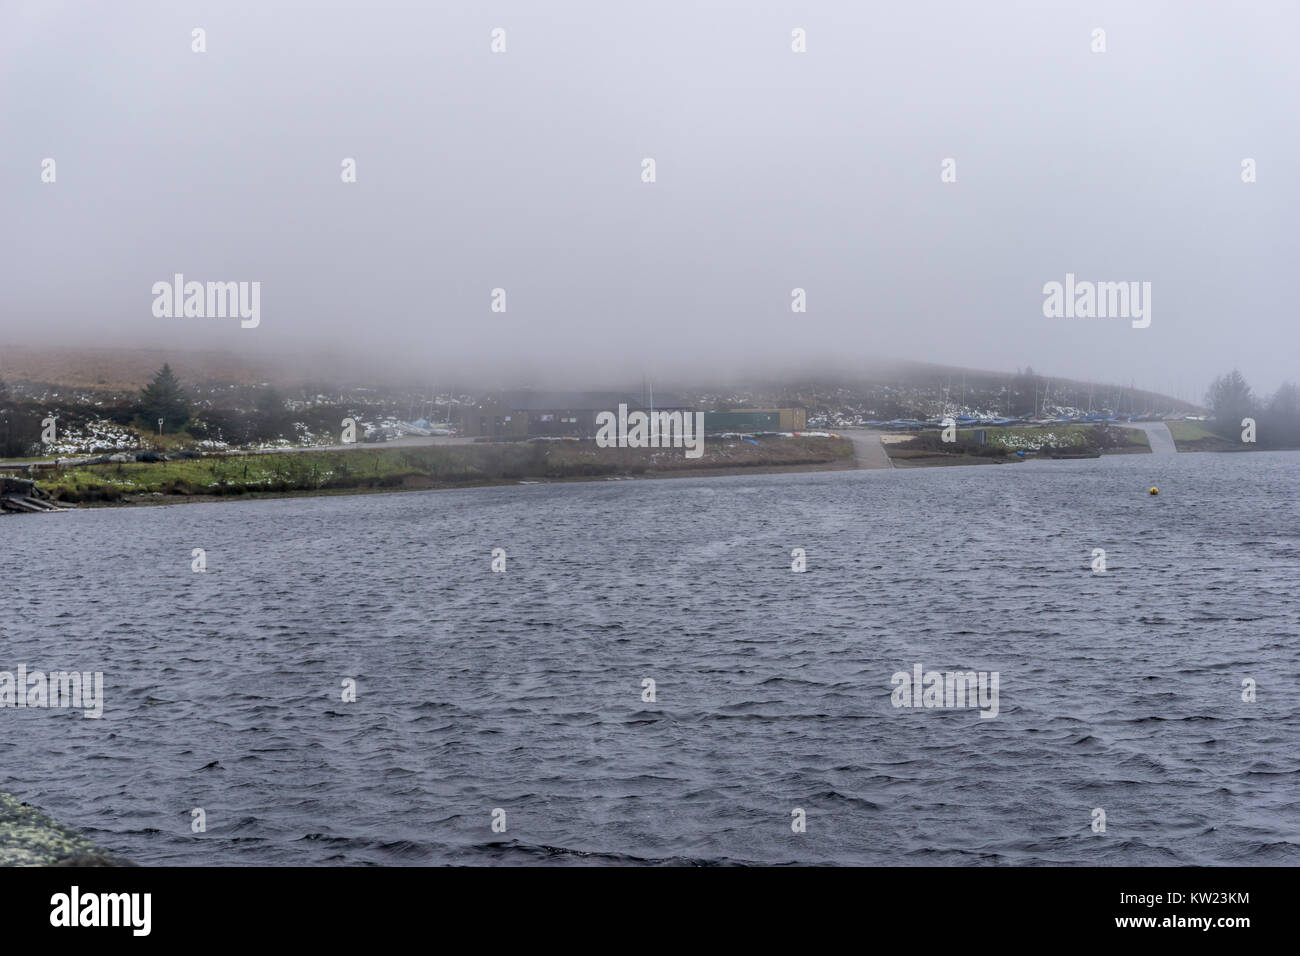 Pennine sailing club. Mist and low cloud at Winscar Reservoir, Barnsley, South Yorkshire, England. 30th December 2017. Credit: Carl Dickinson/Alamy Live News Stock Photo